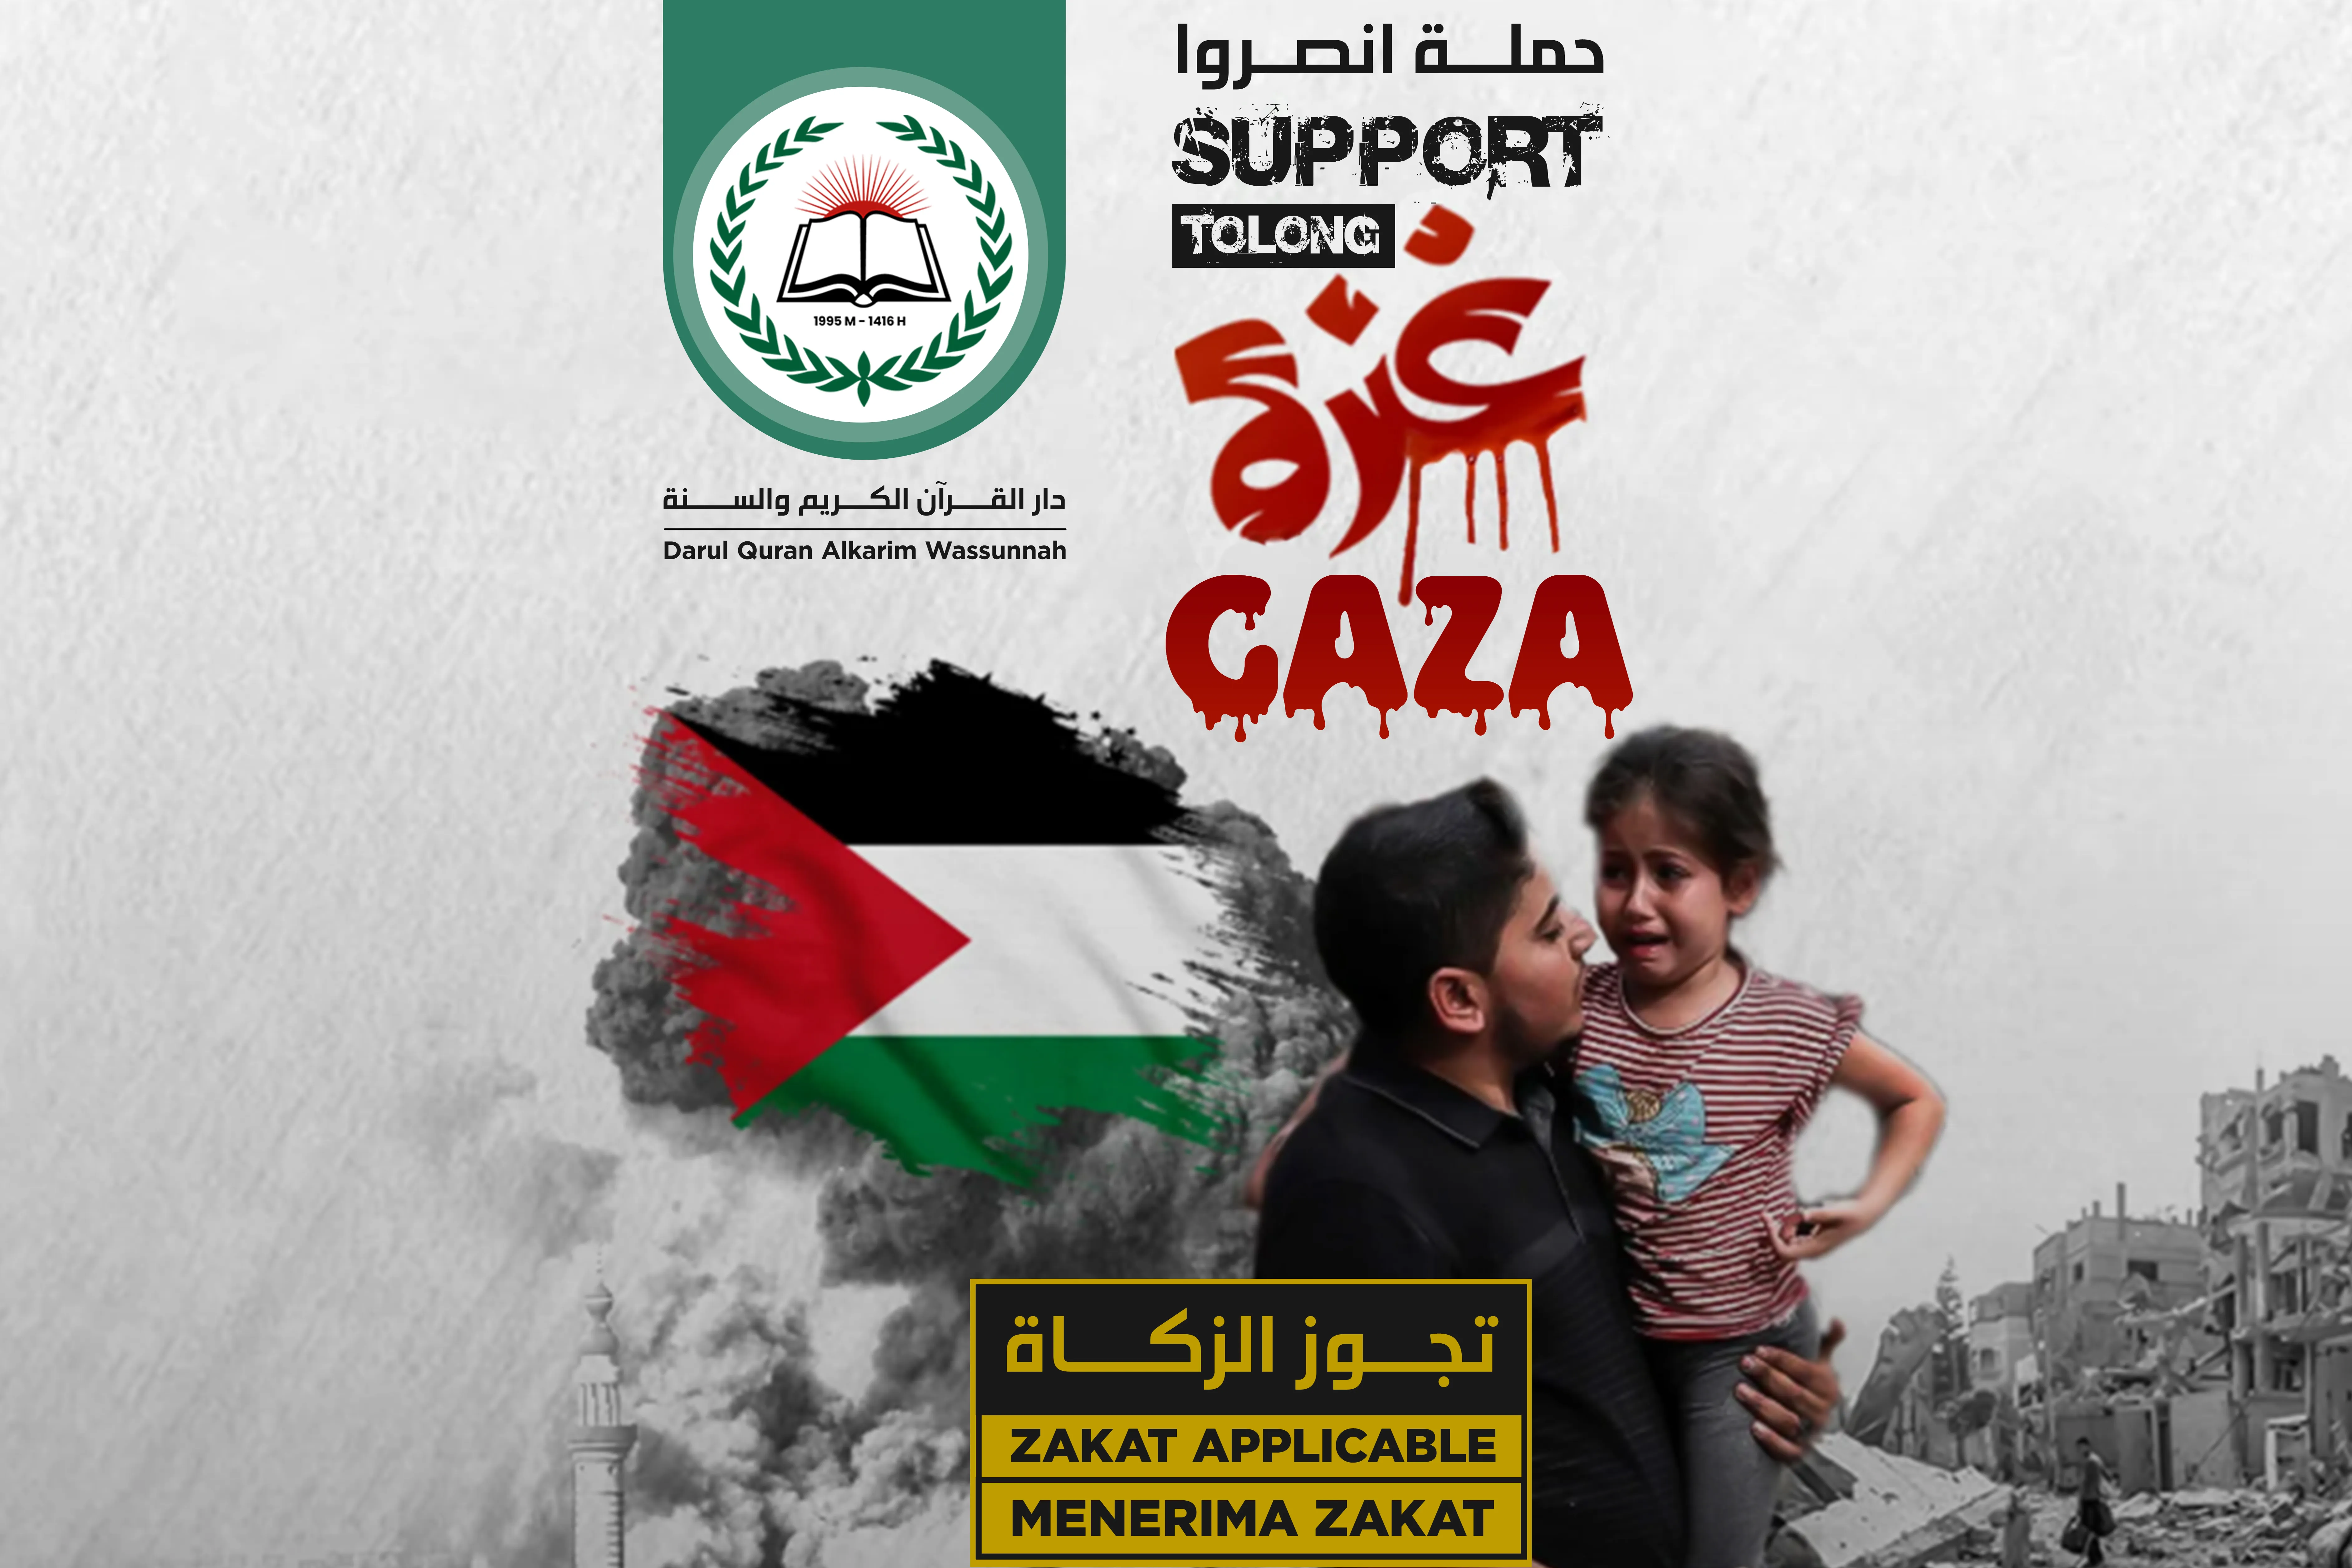 Support Gaza campaign to support our people in the Gaza Strip